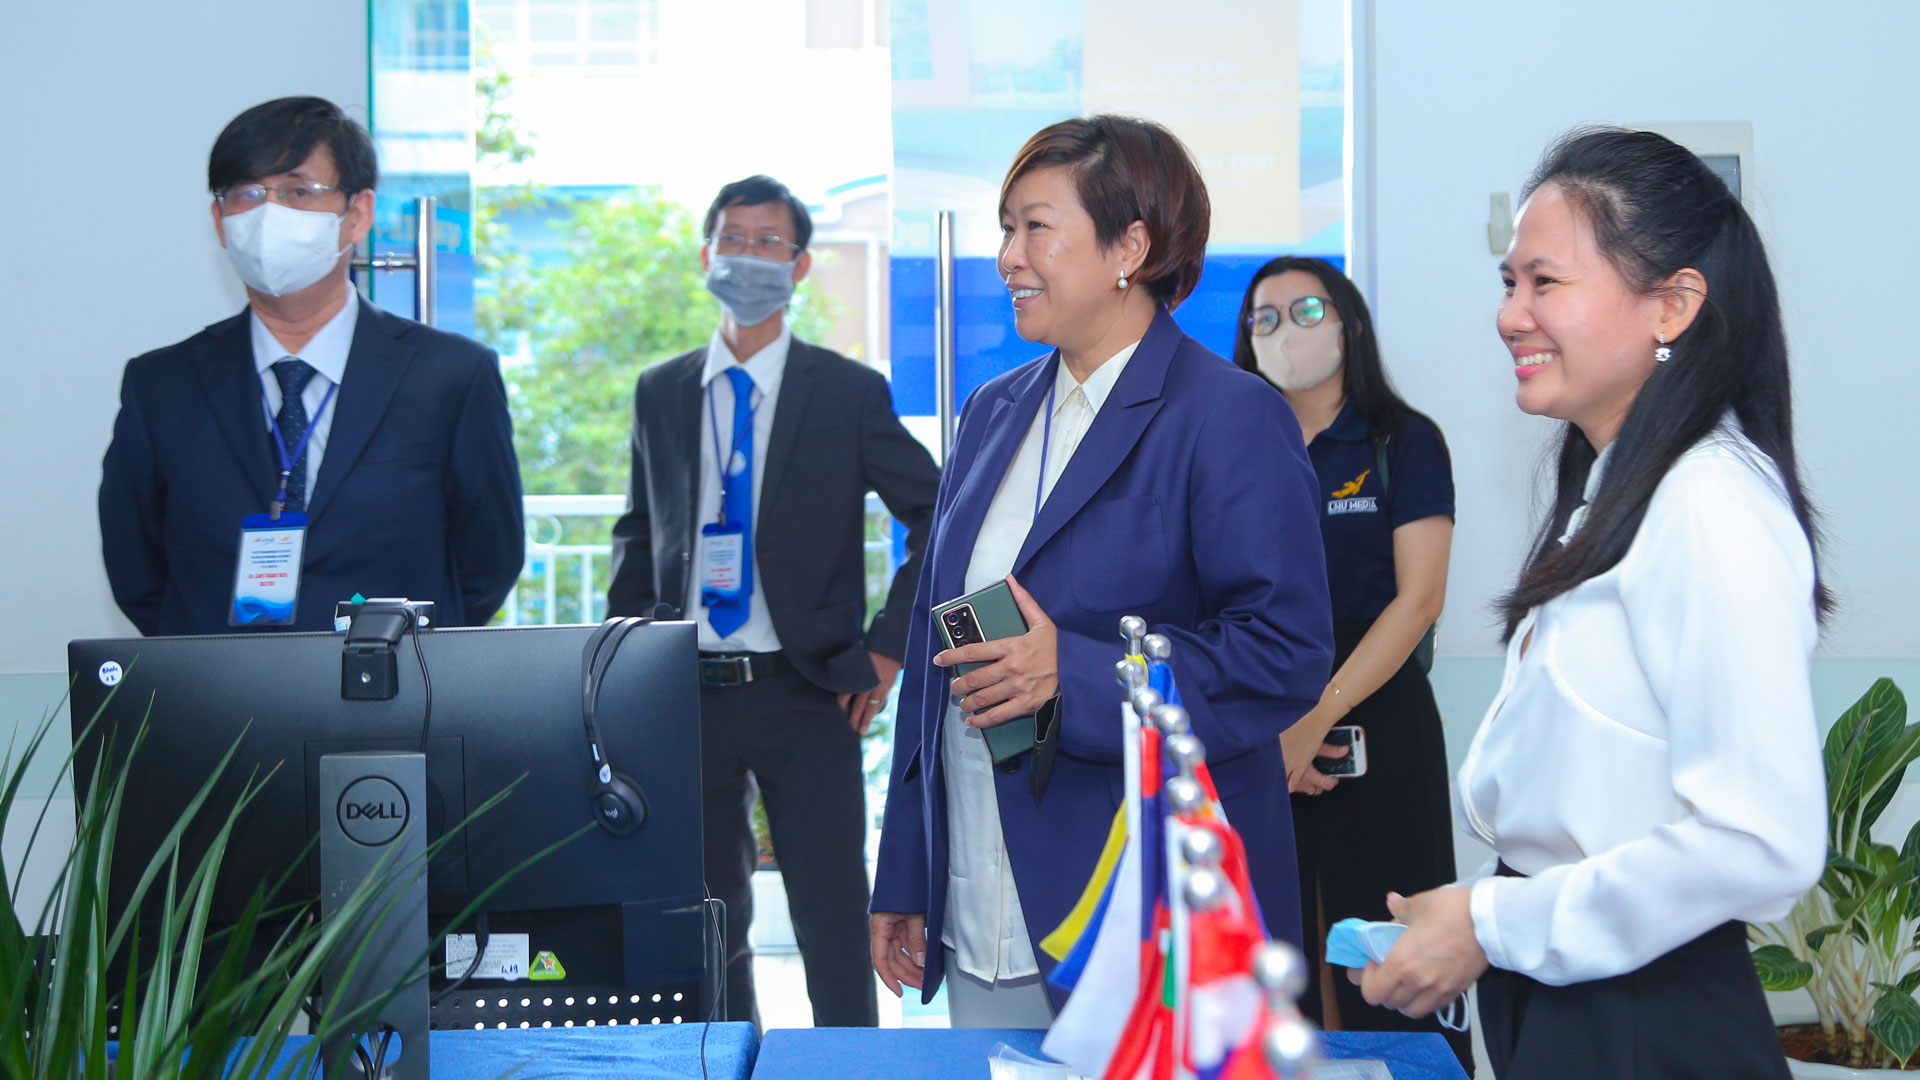 Do Thi Lan Dai (pictured at center) is the first female chair of the University Council at Lac Hong University.